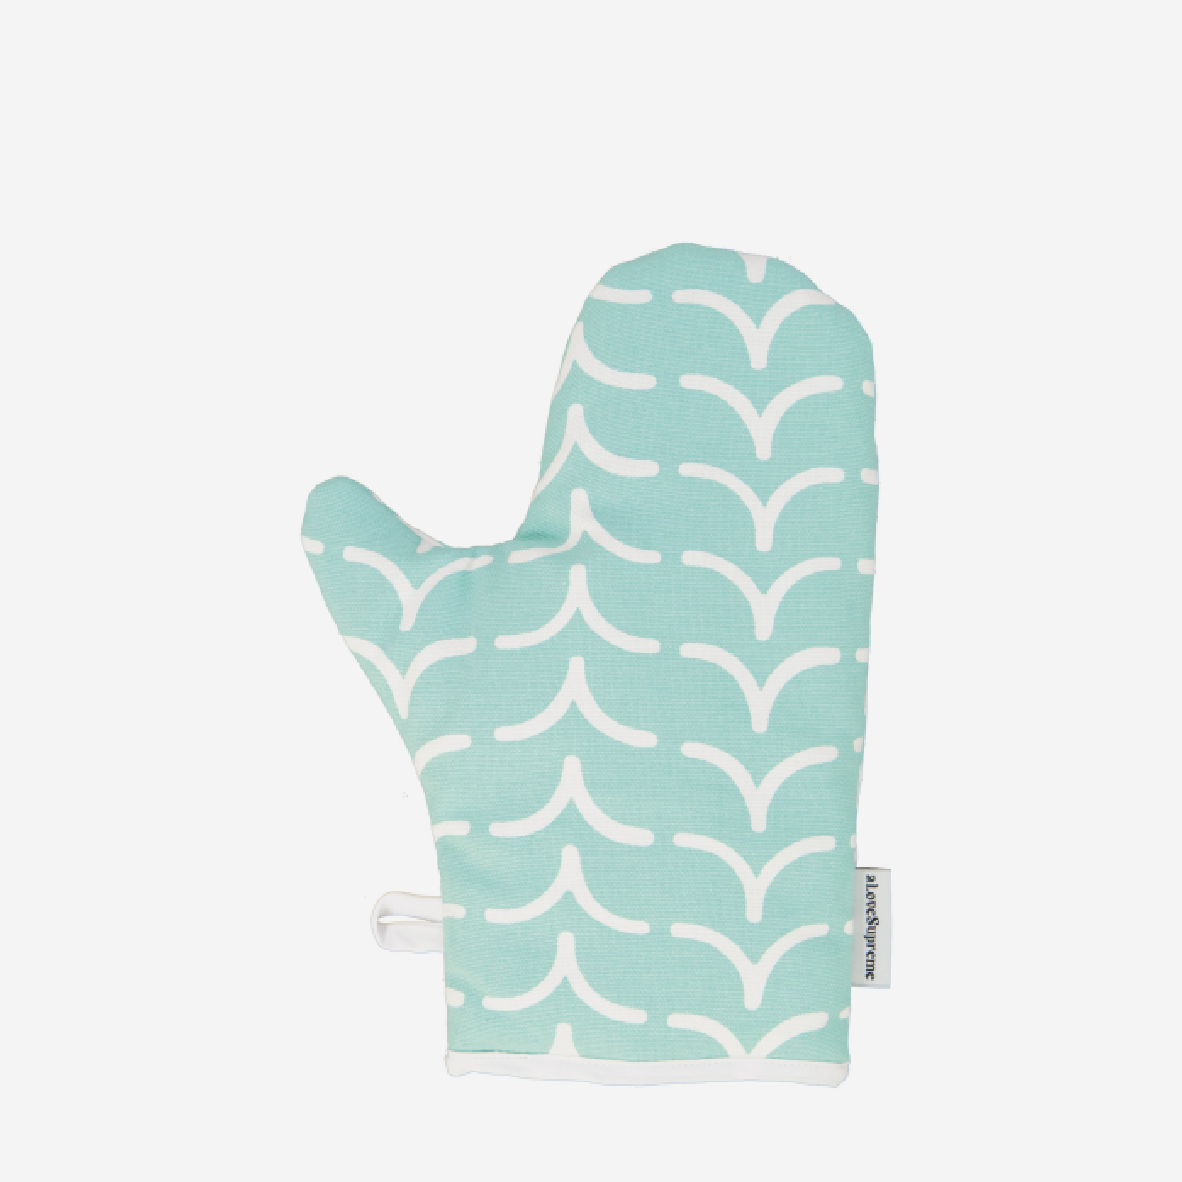 Oven Mitt - Whales Tail